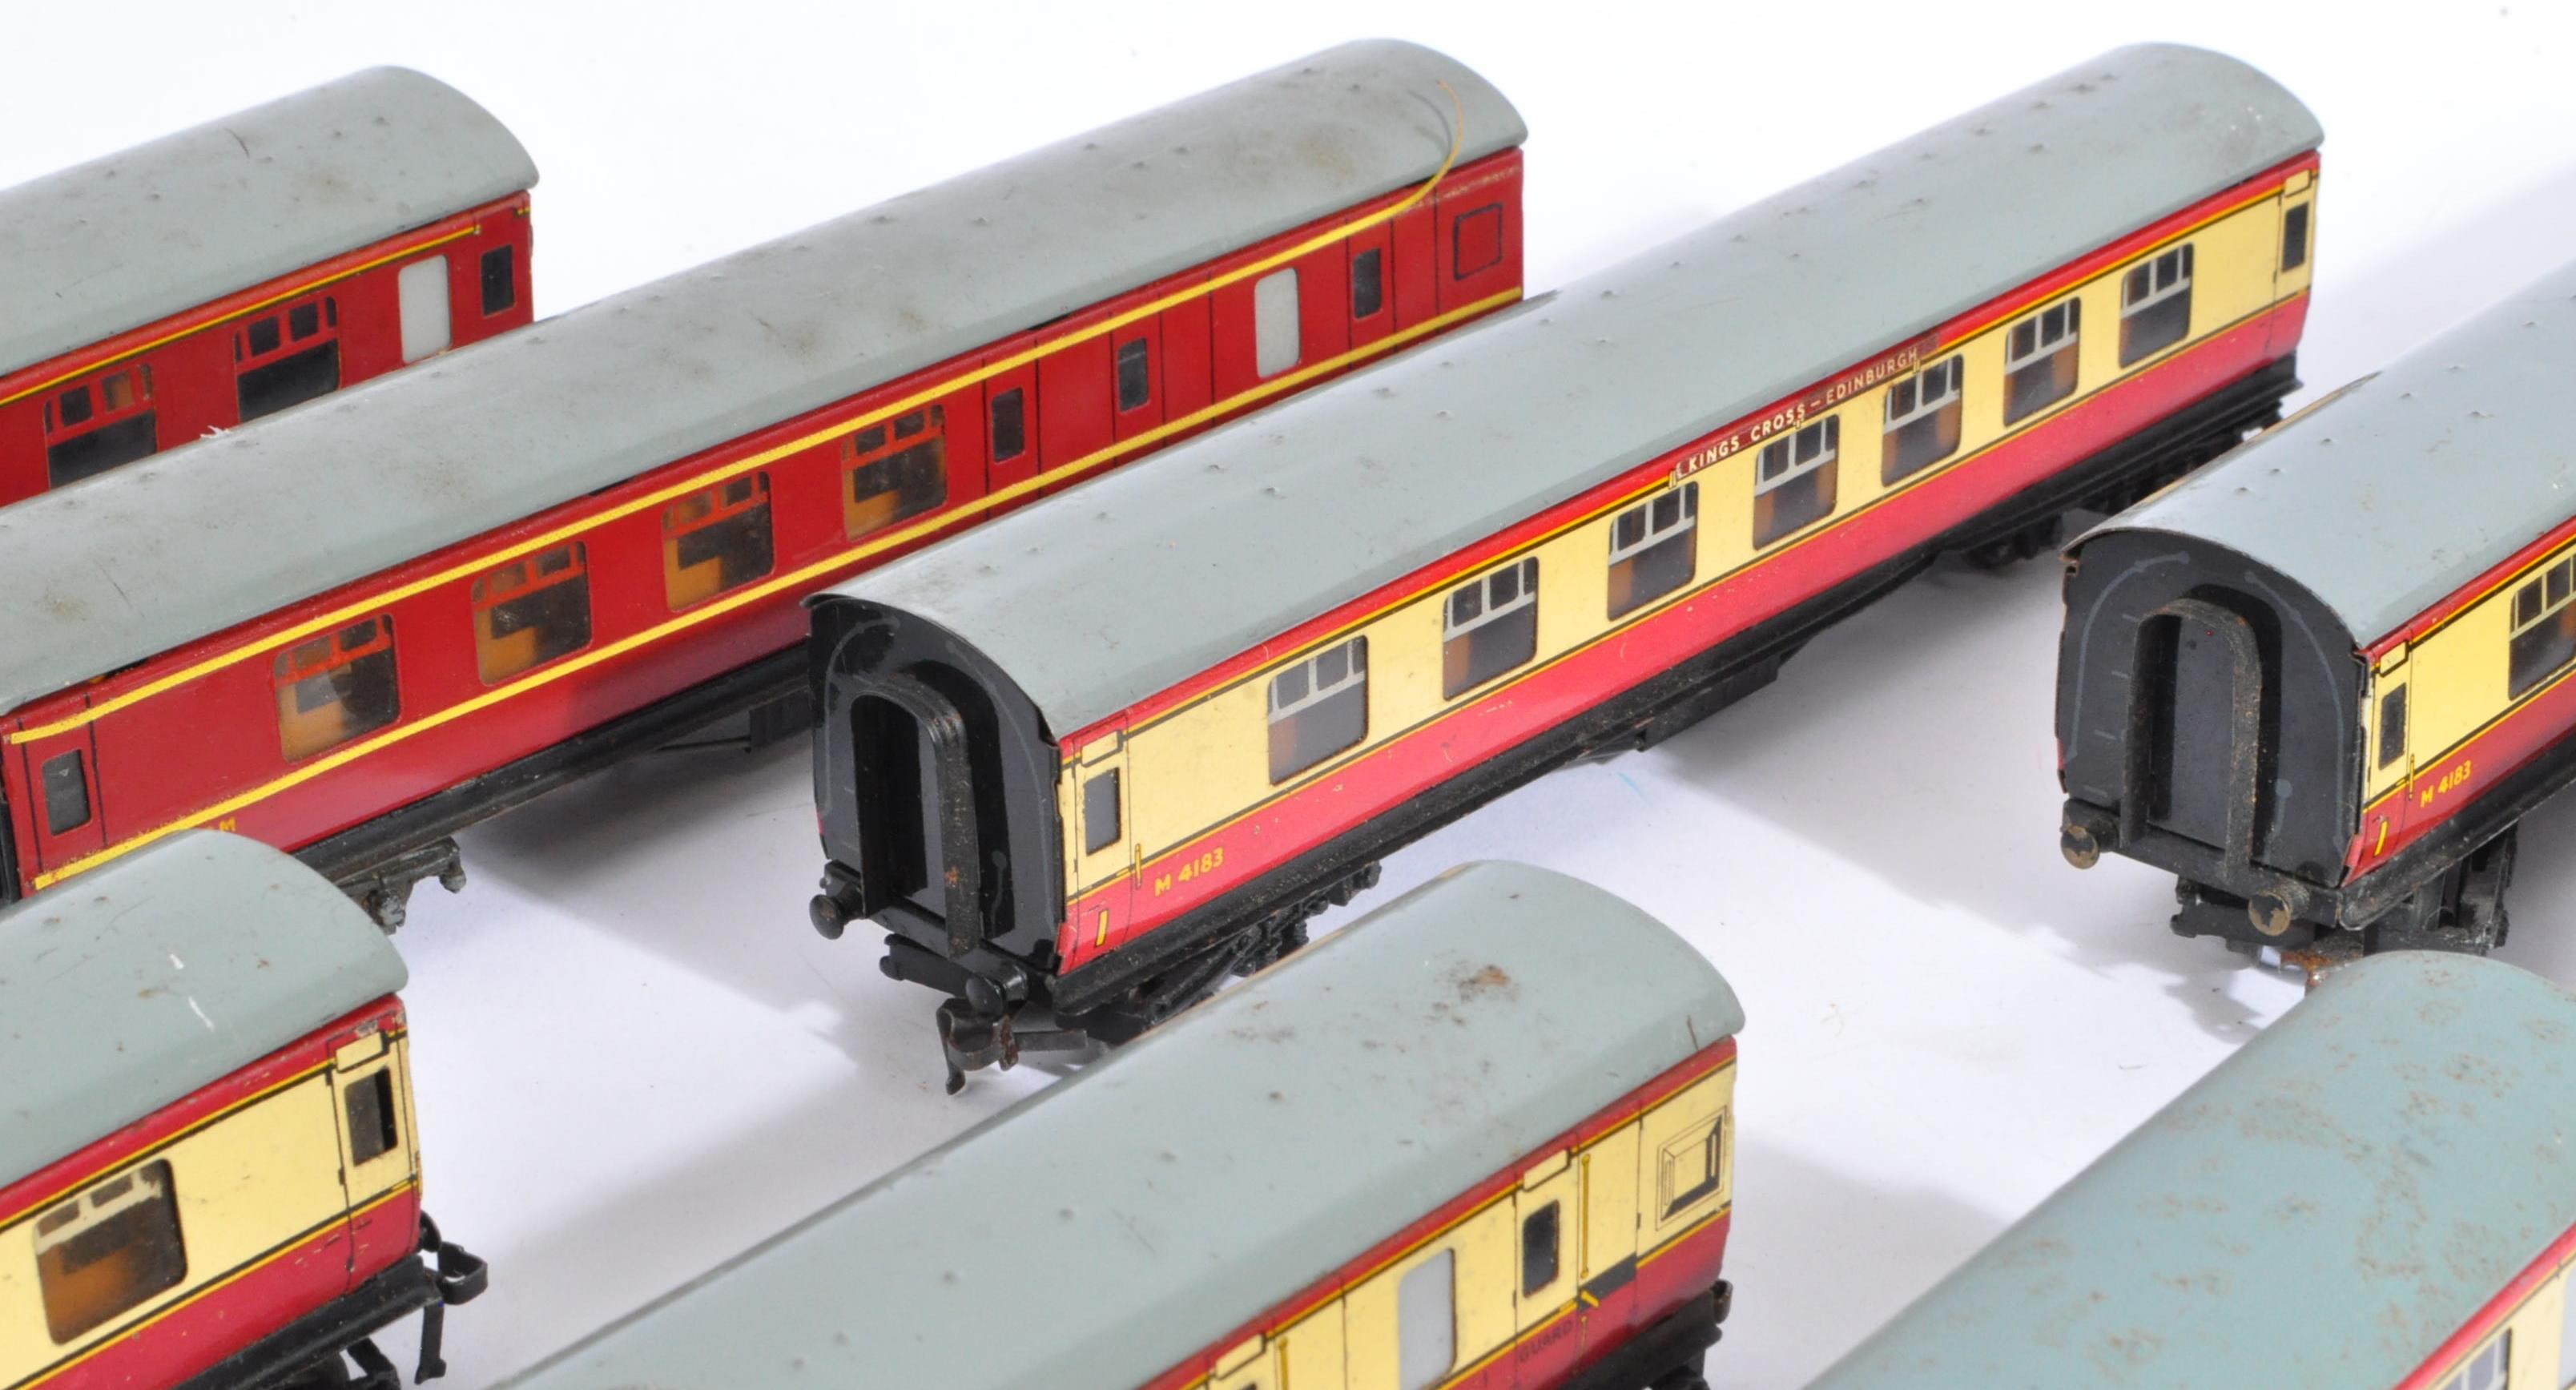 COLLECTION OF HORNBY DUBLO MODEL RAILWAY TRAINSET CARRIAGES - Image 3 of 5